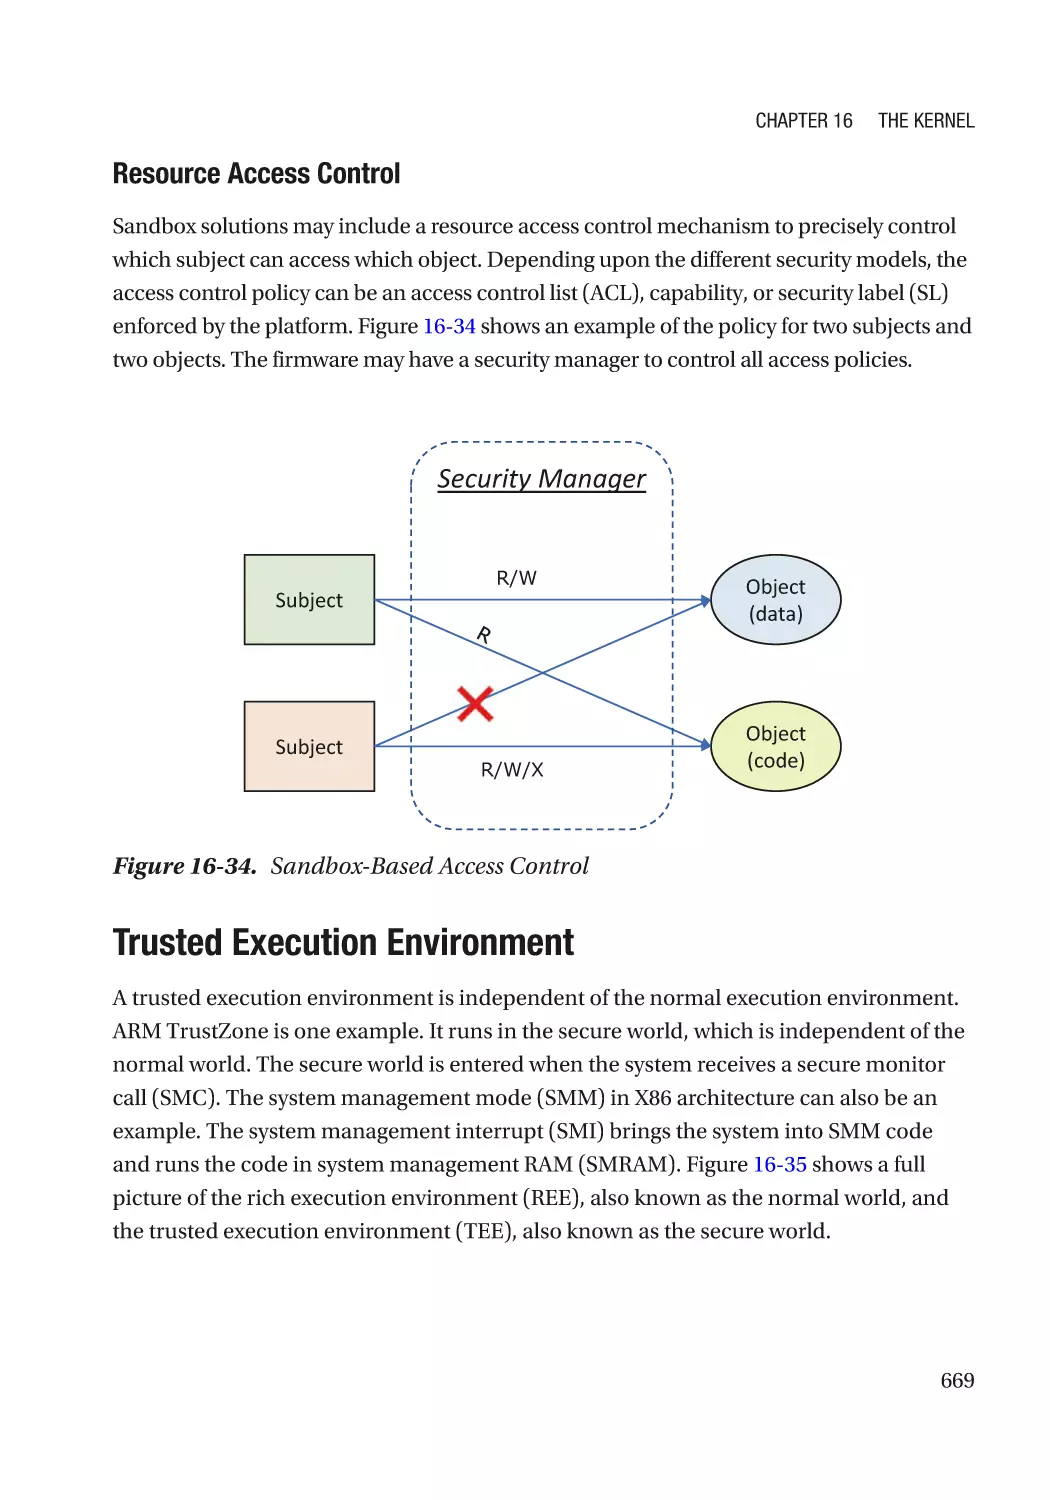 Resource Access Control
Trusted Execution Environment